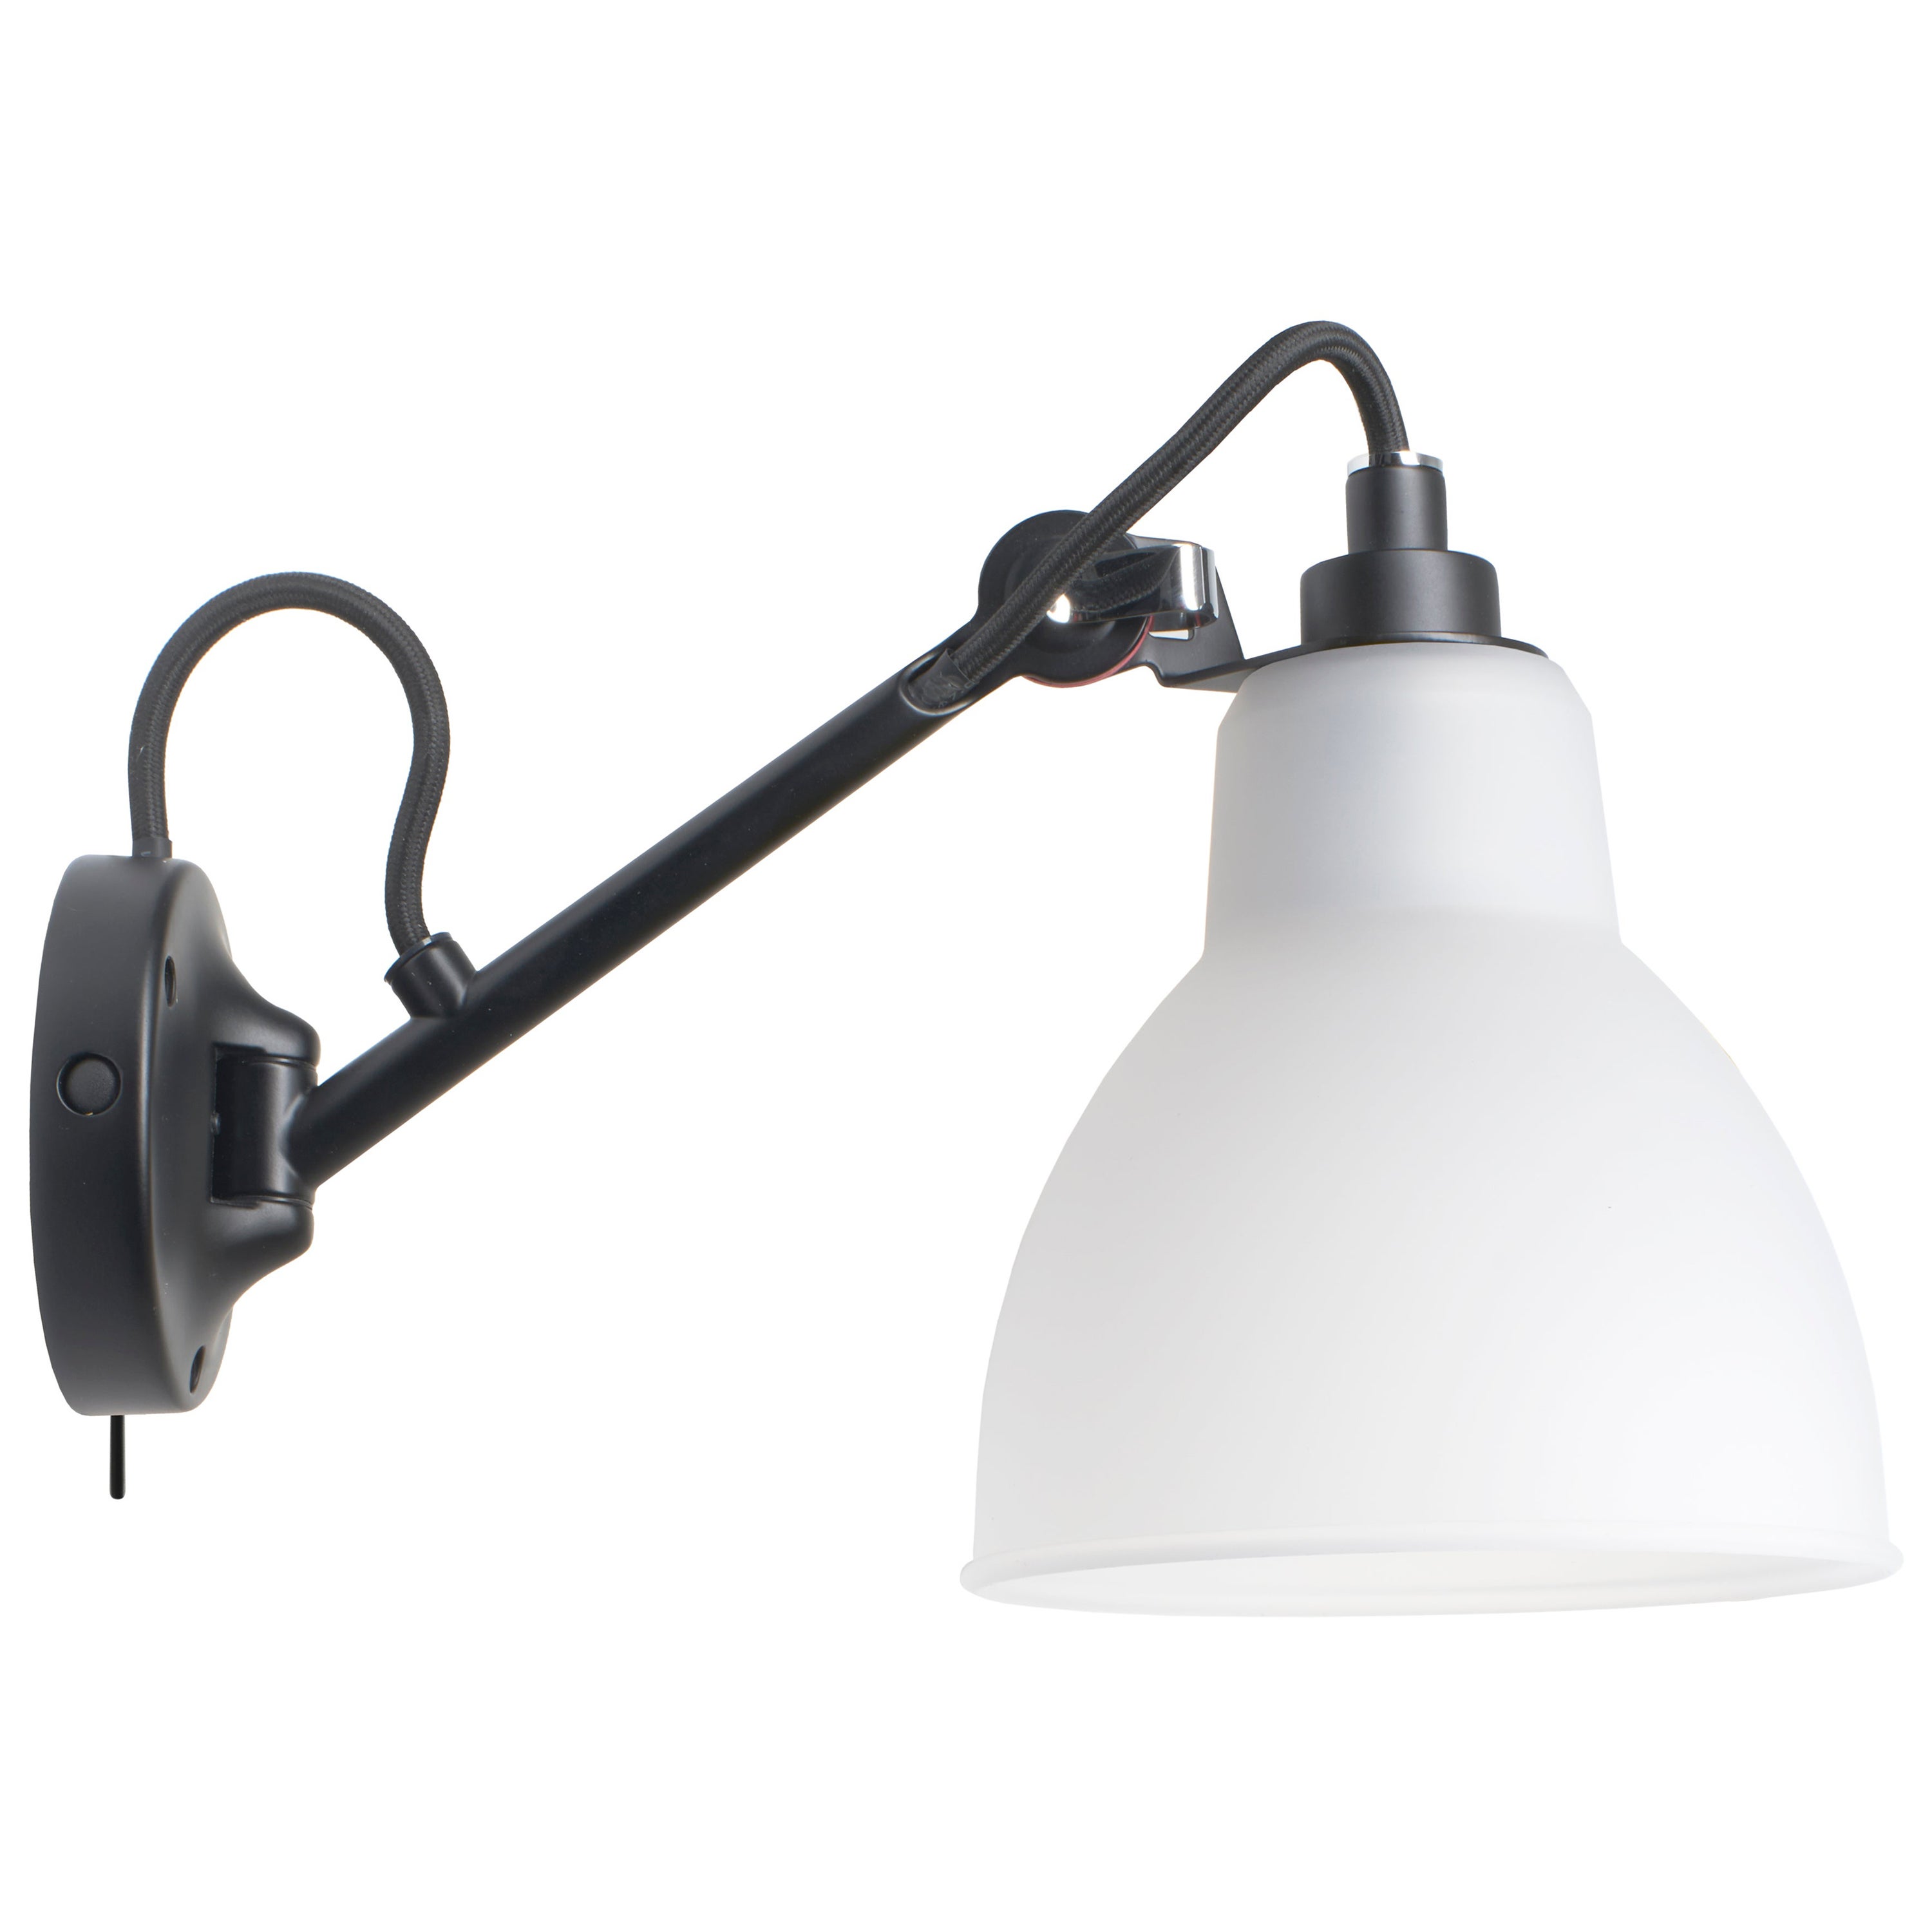 DCW Editions La Lampe Gras N°104 SW Wall Lamp in Black Arm & Polycarbonate Shade